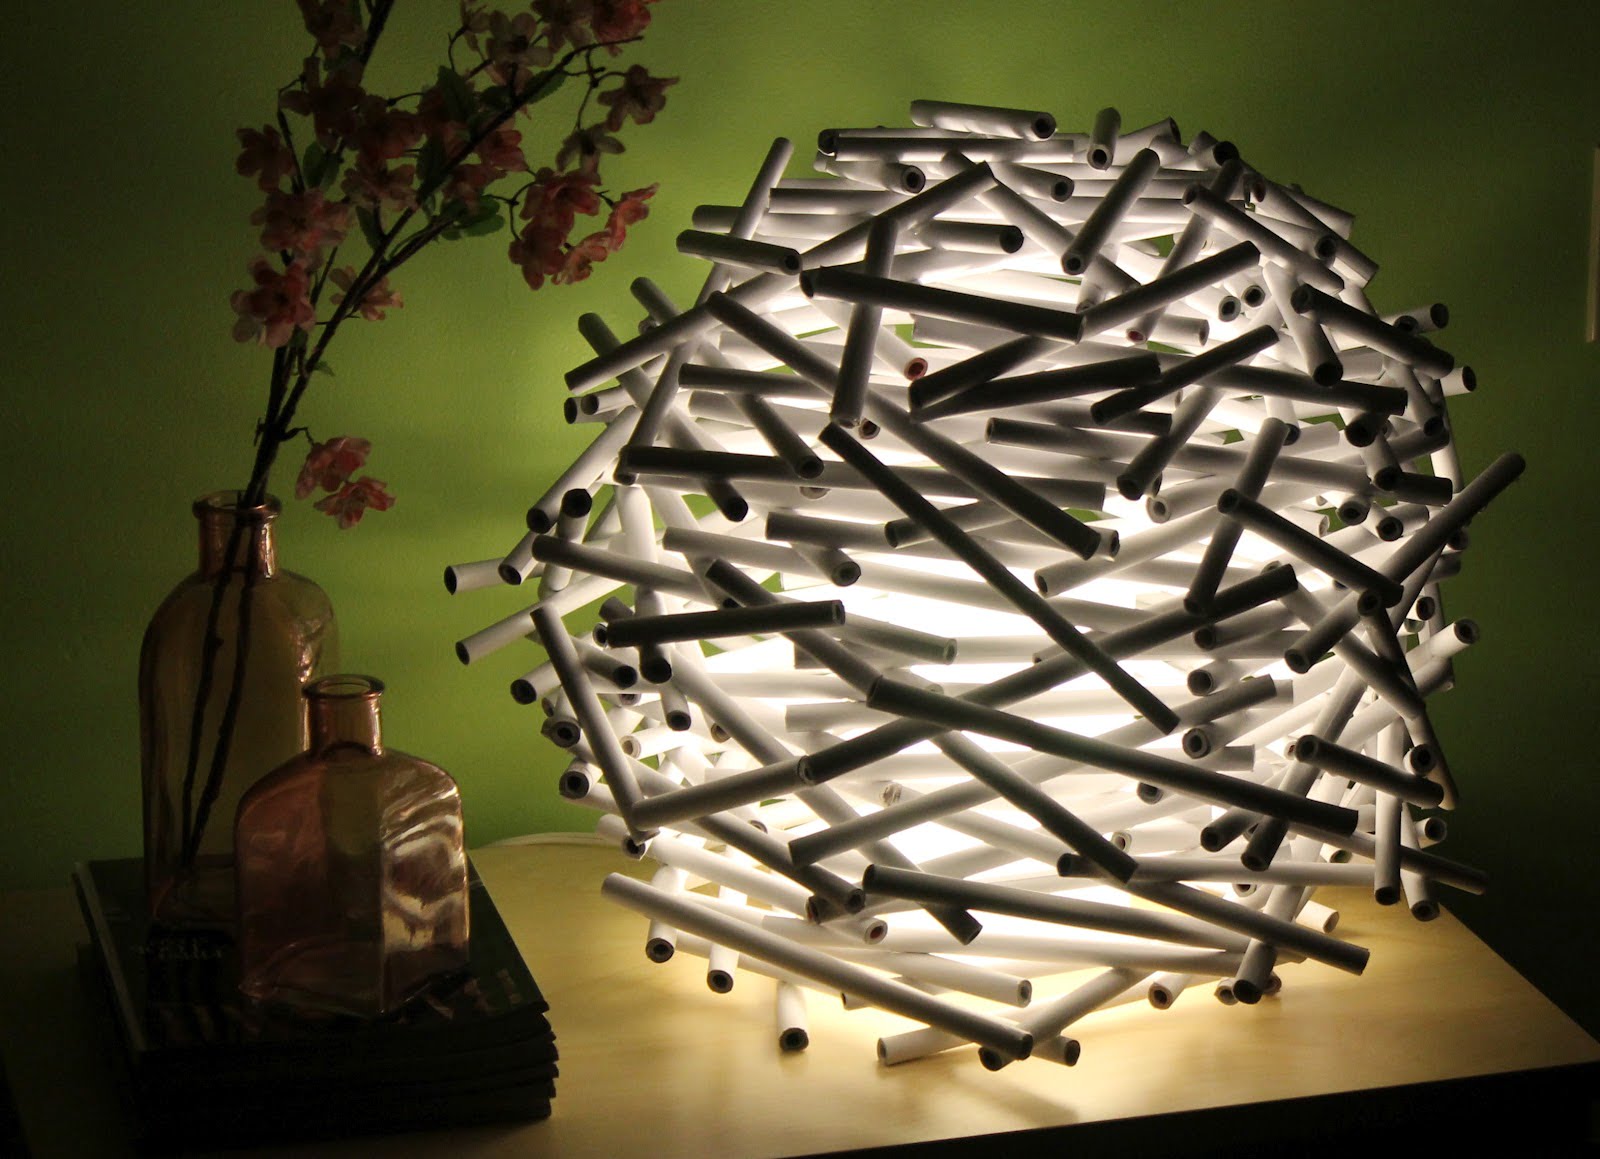 15. Glue PVC sticks in a round shape and add some light for an interesting effect